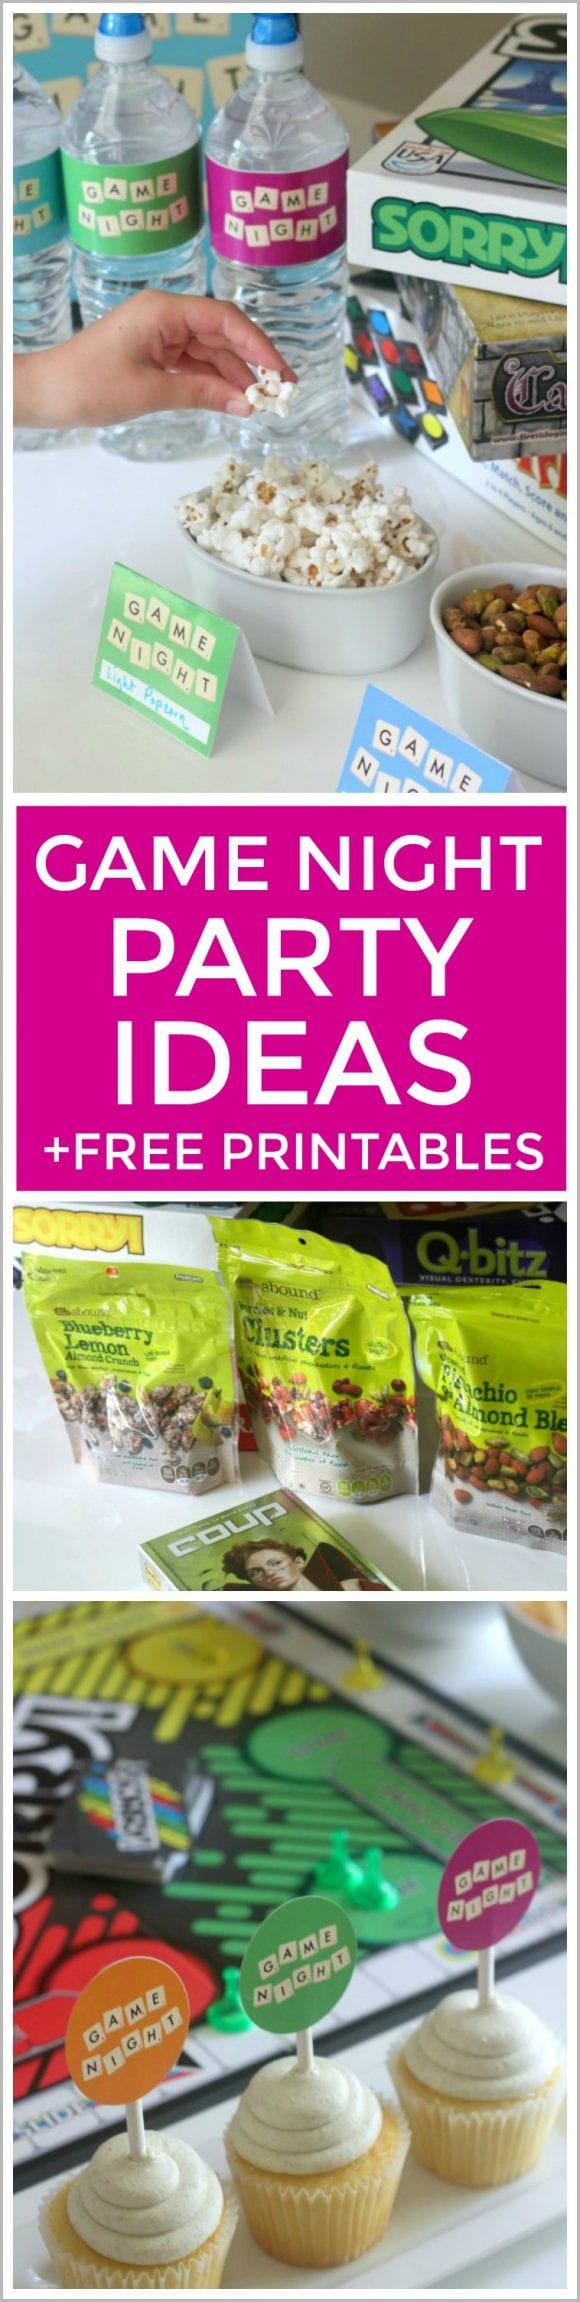 How To Throw A Game Night Party + Free Printables | CatchMyParty.com